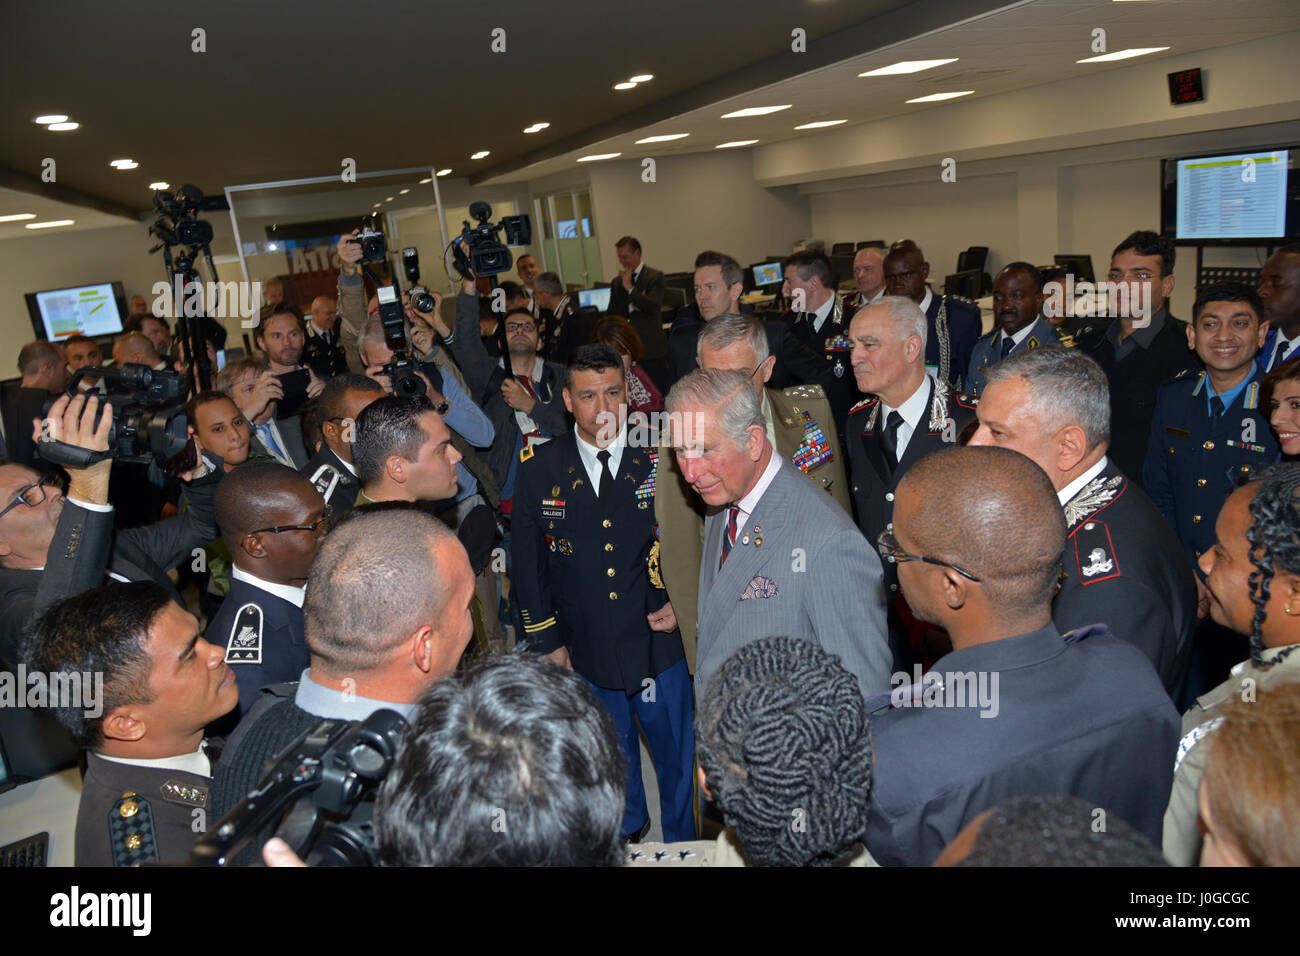 The Royal Highness, Prince Charles, Prince of Wales, meets students from Europe, Africa, Italy and the U.S., during visit at Center of Excellence for Stability Police Units (CoESPU) Vicenza, Italy, April 1, 2017. (U.S. Army Photo by Visual Information Specialist Antonio Bedin/released) Stock Photo